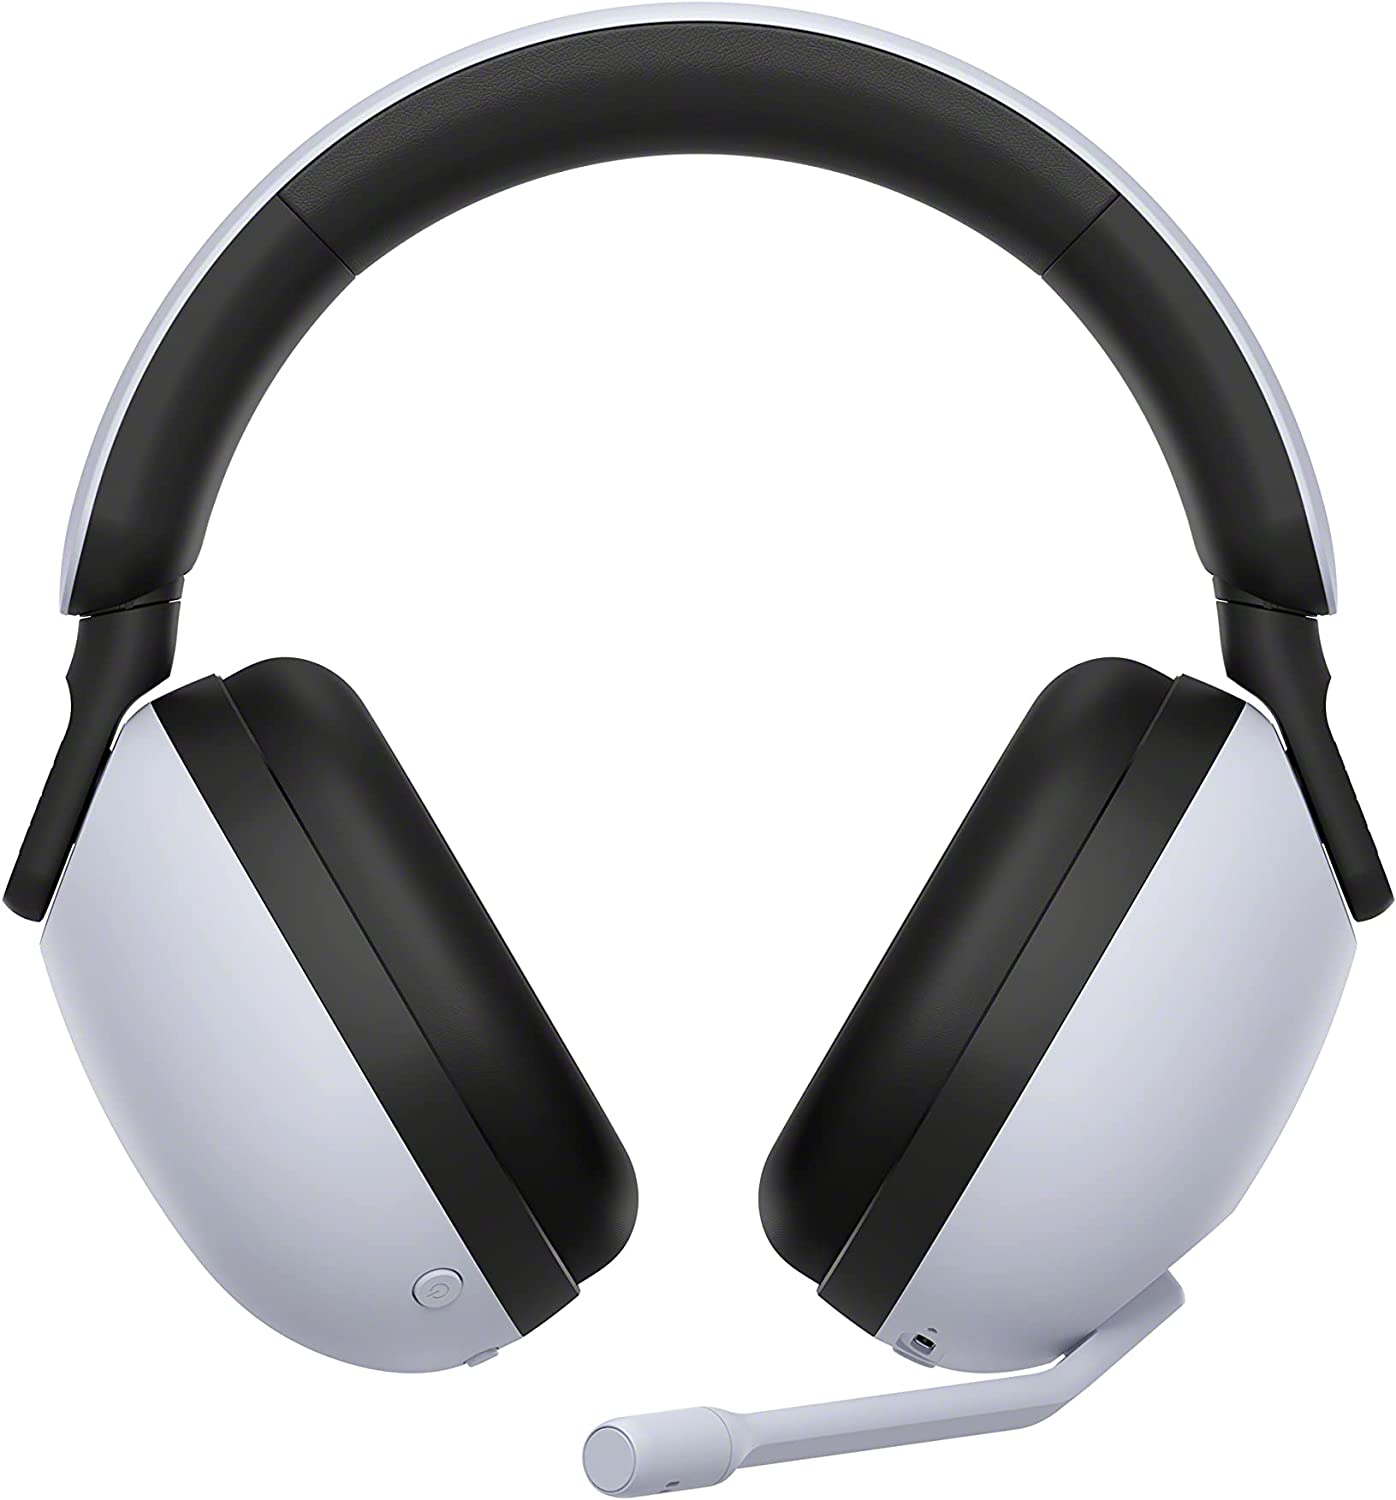 Sony-INZONE H9 Wireless Noise Canceling Gaming Headset For PC and PlayStation 5